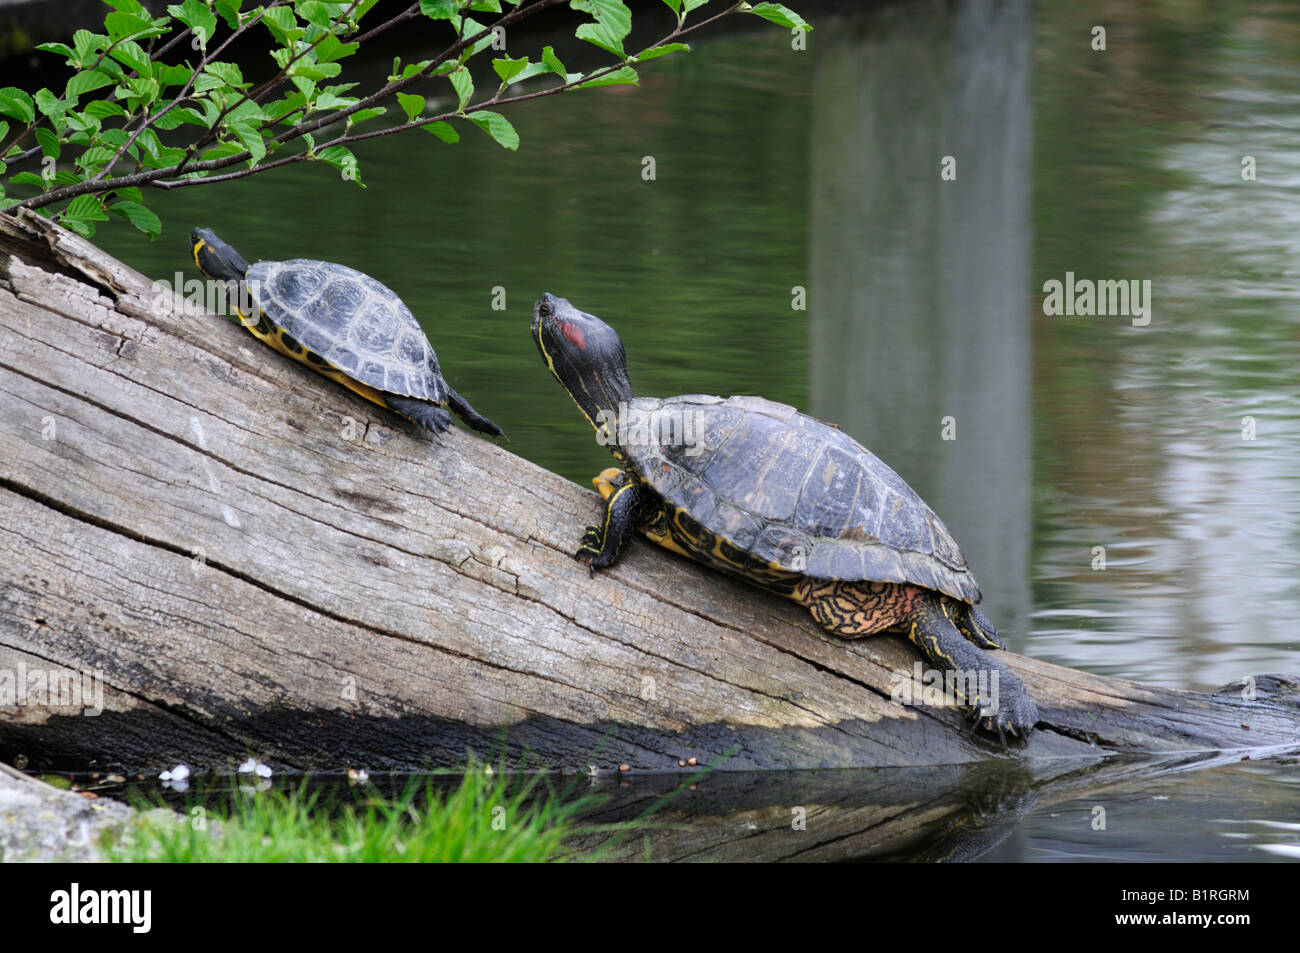 Two Red-eared Sliders (Trachemys scripta elegans) on a tree trunk in the water Stock Photo